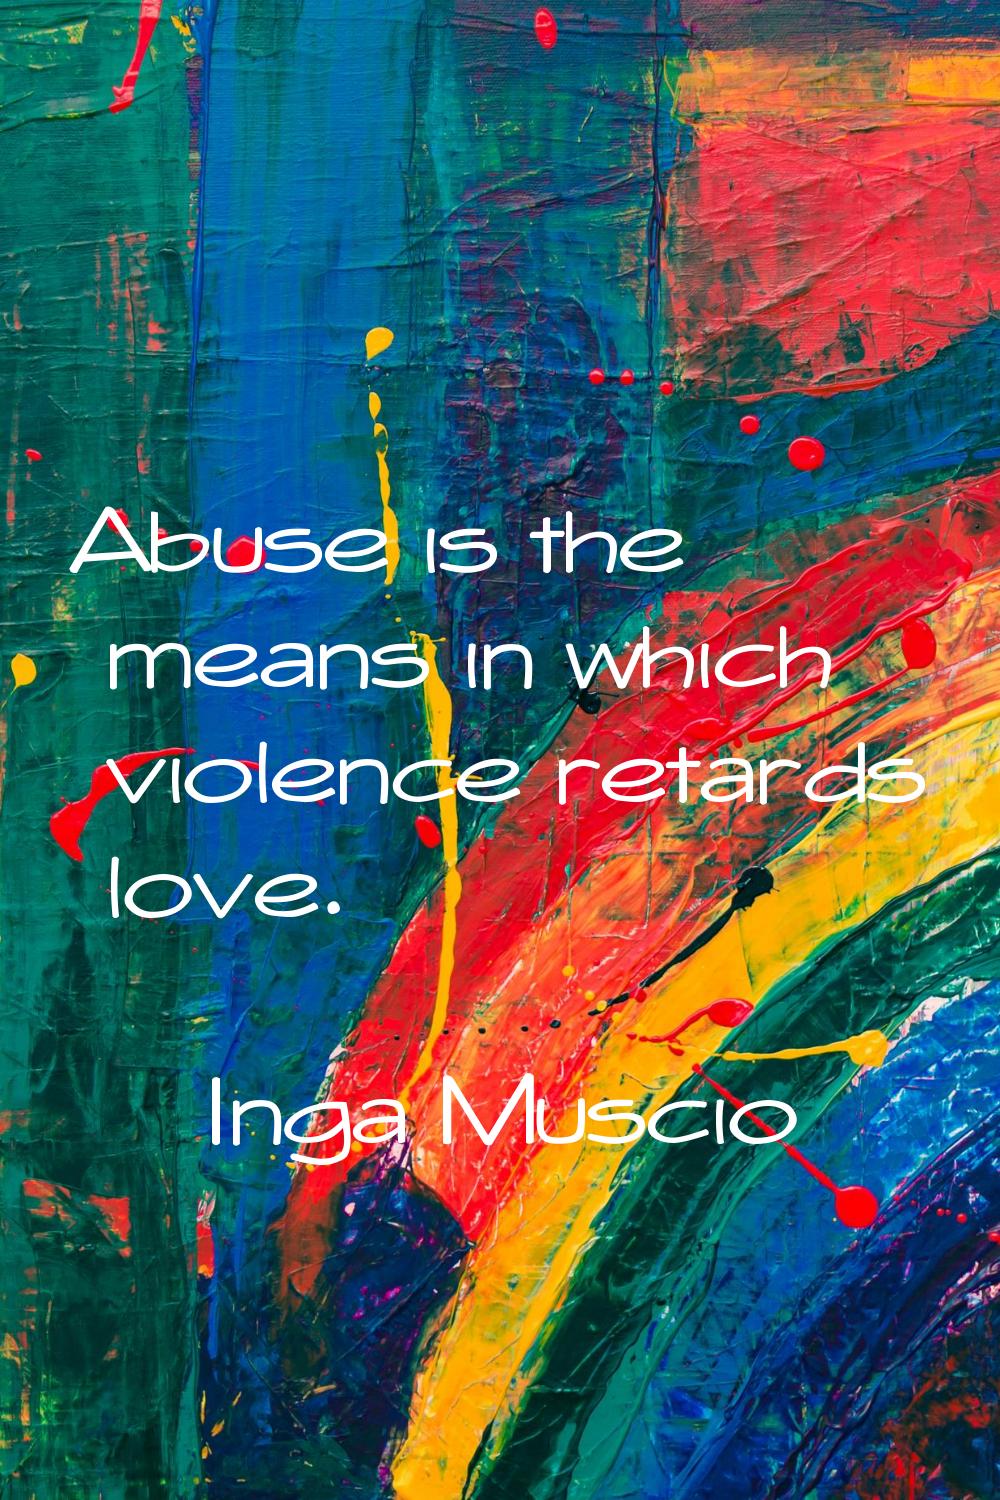 Abuse is the means in which violence retards love.